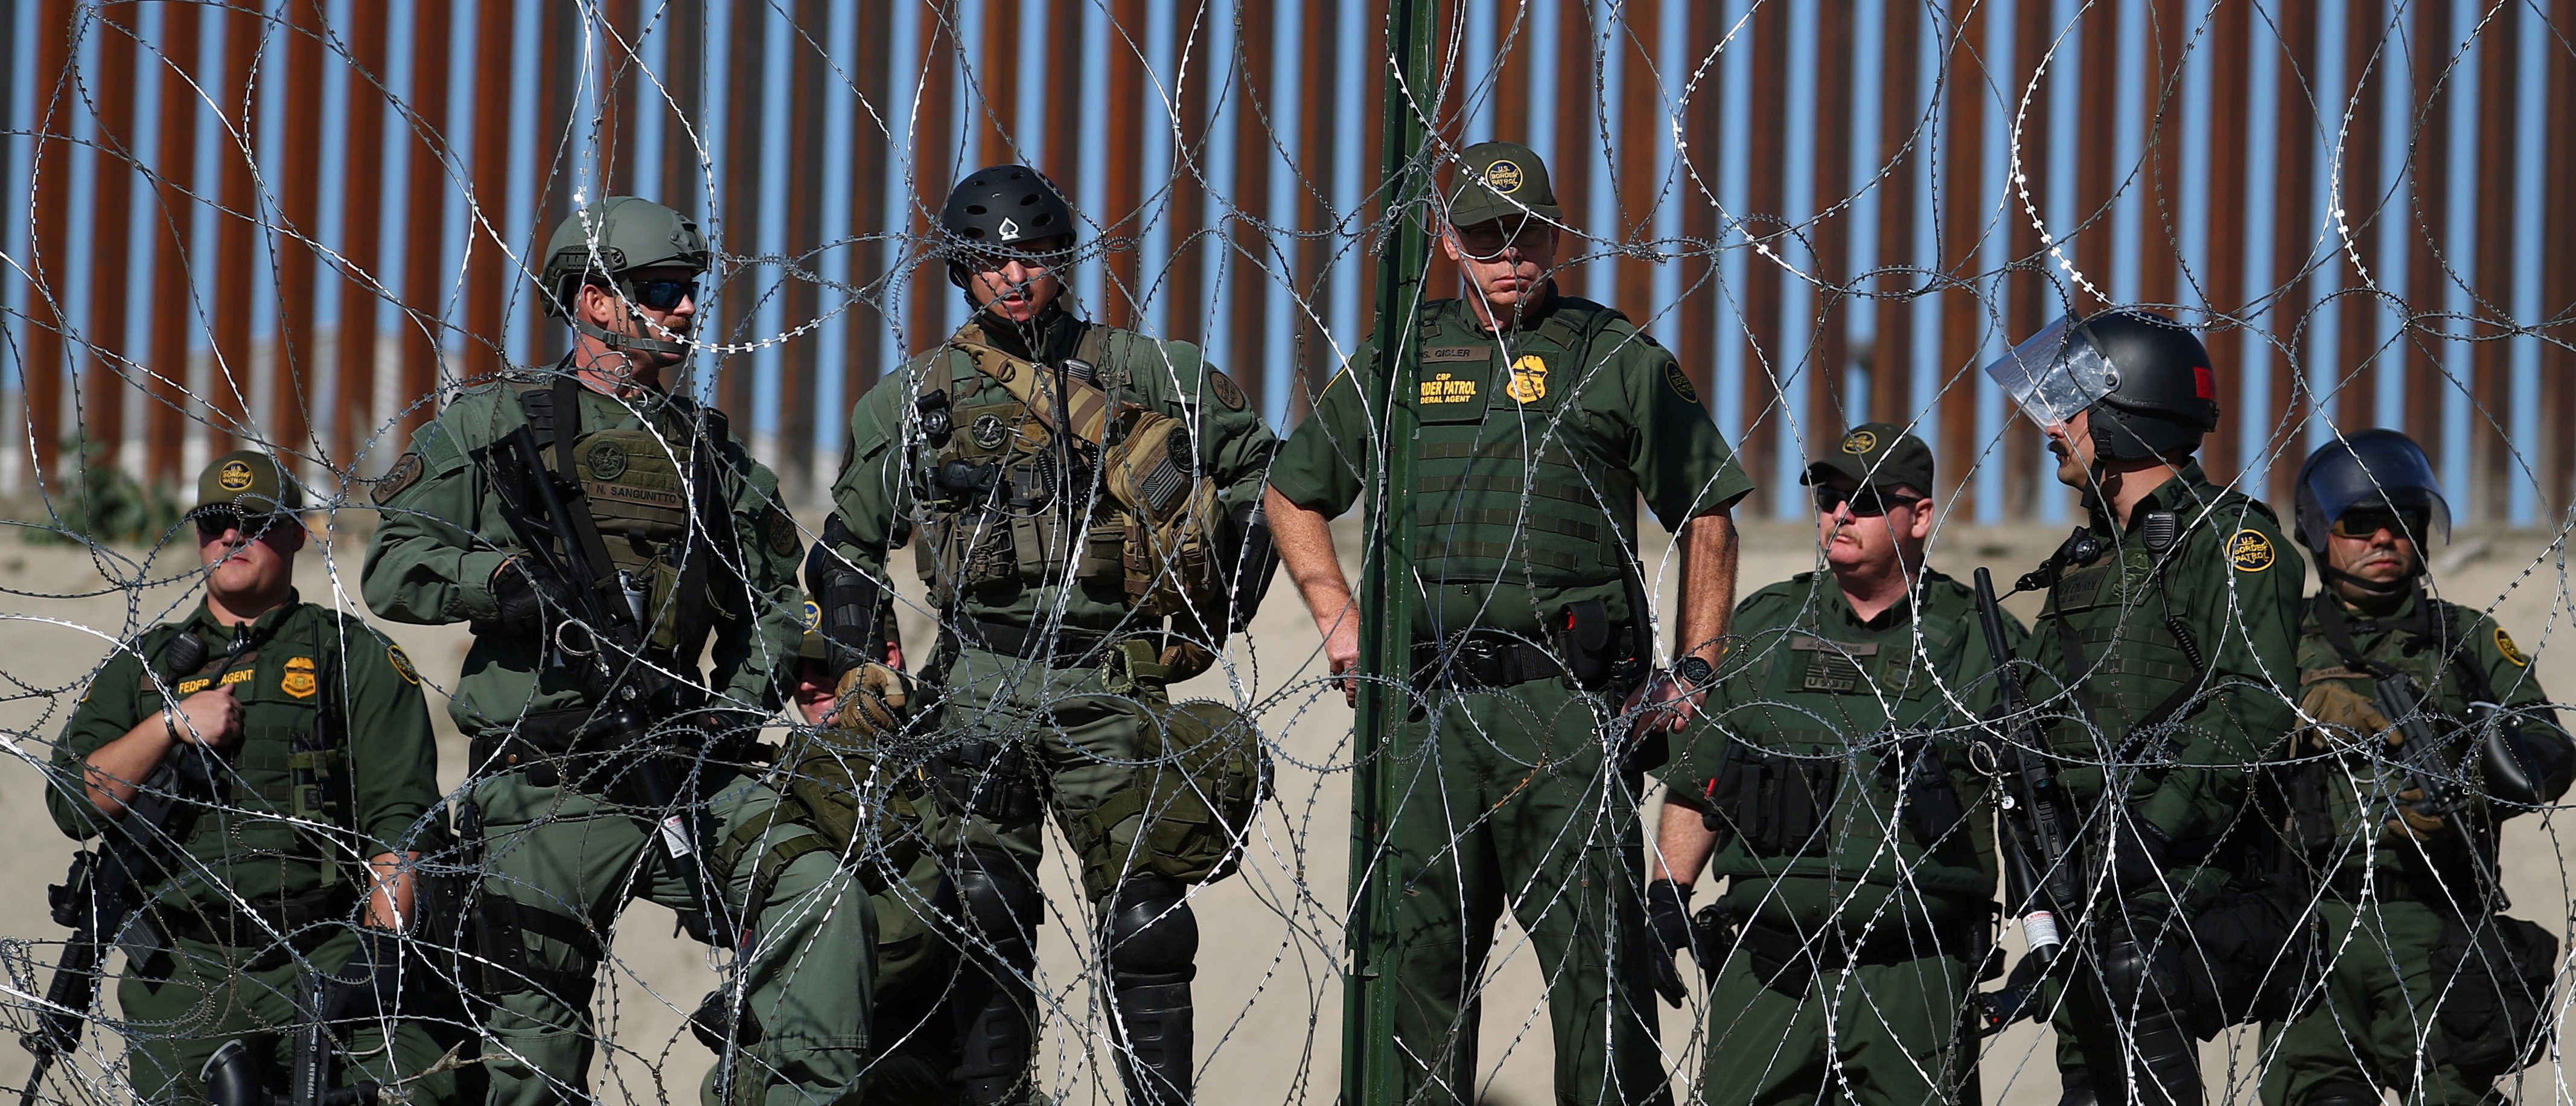 U.S border patrol stand near the border fence between Mexico and the United States as migrants stand near by in Tijuana, Mexico, November 25, 2018. REUTERS/Hannah McKay